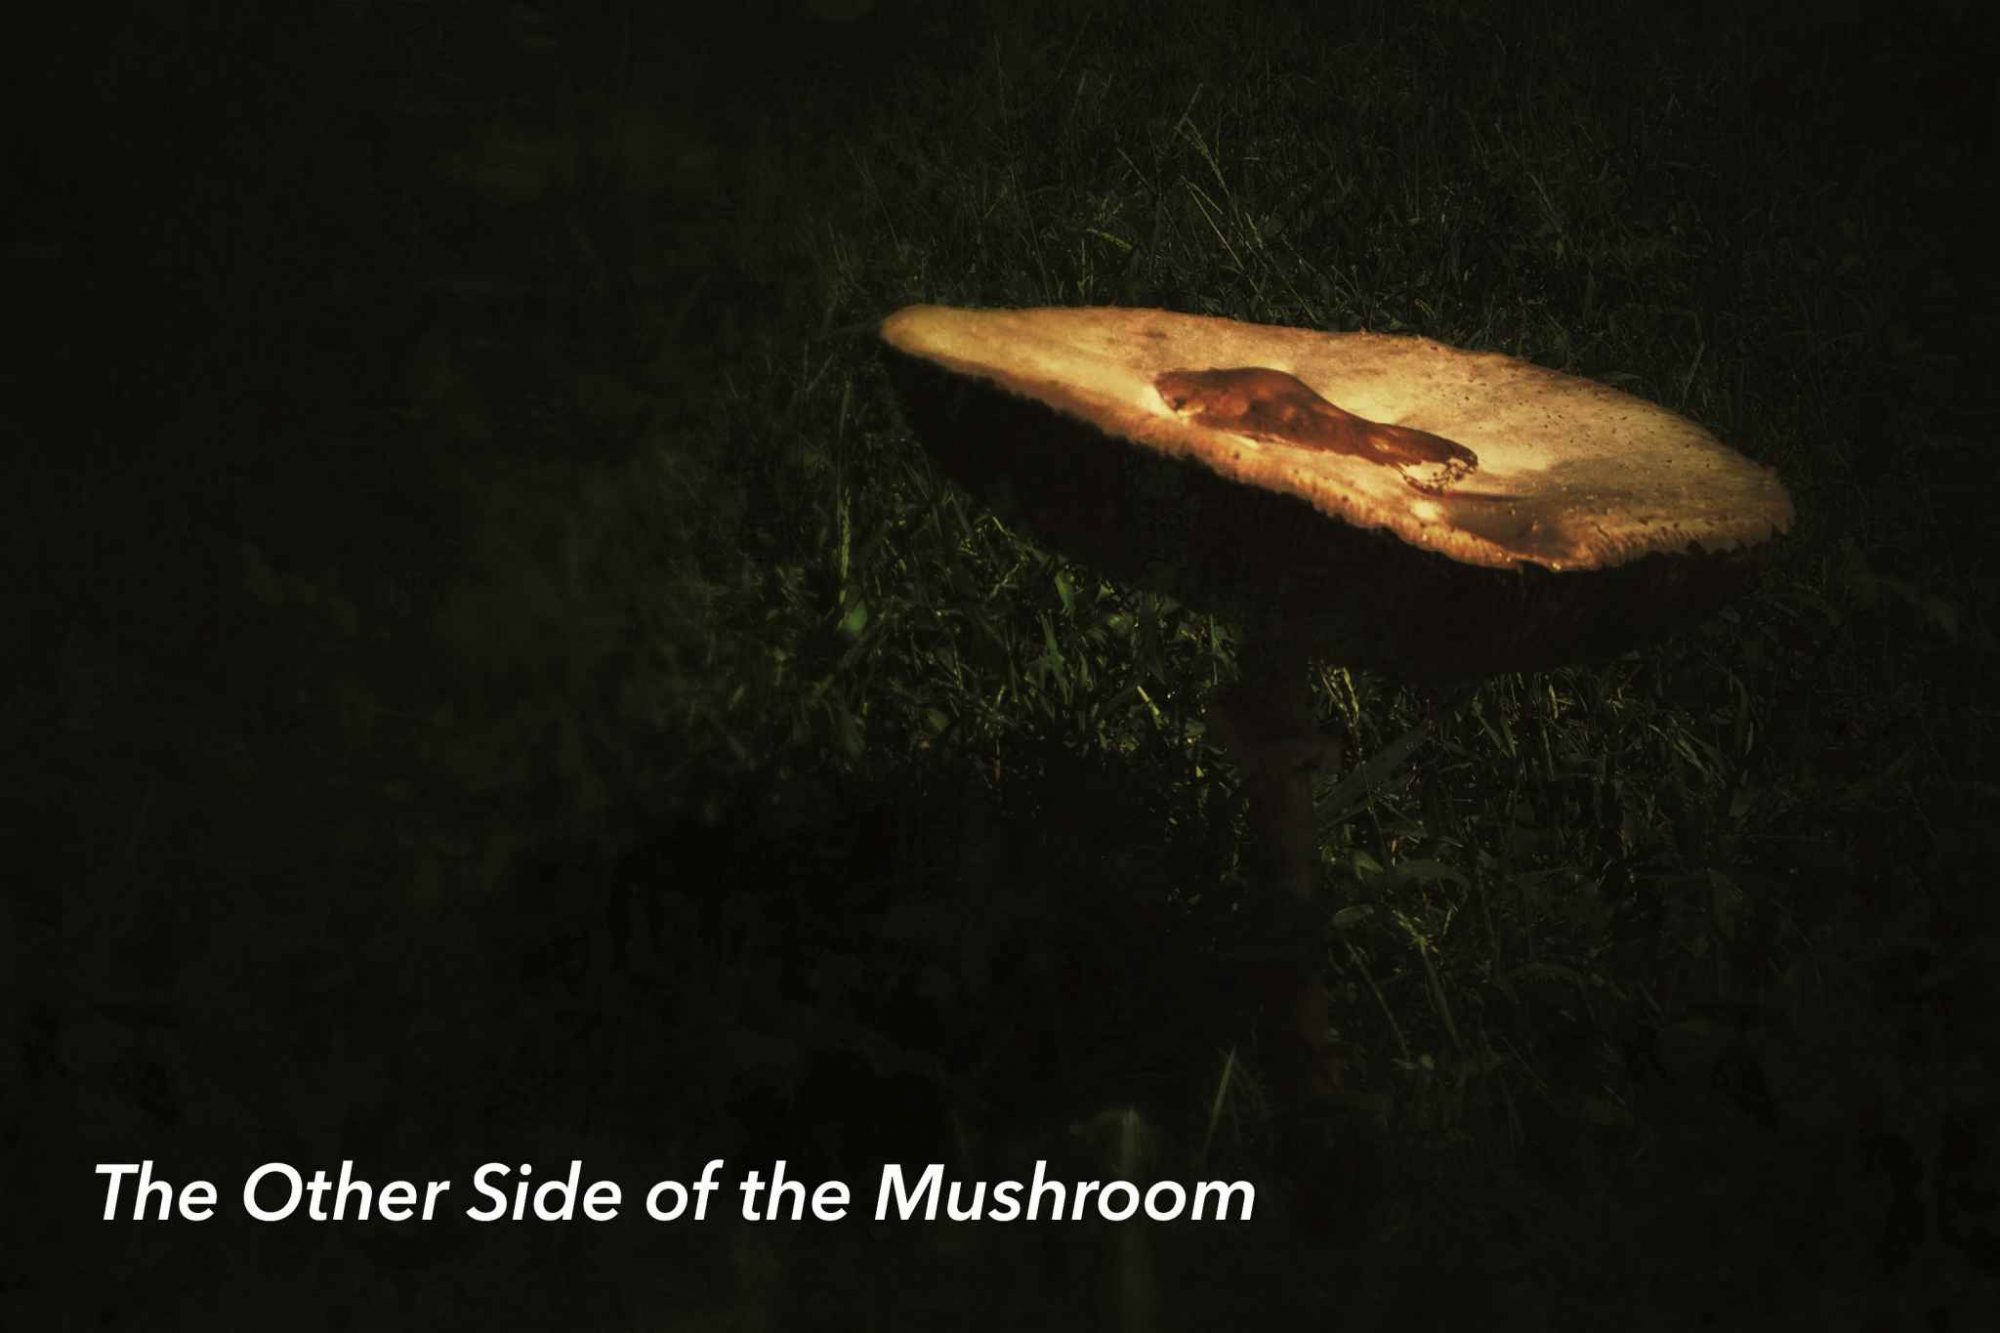 There are always two sides to a mushroom...